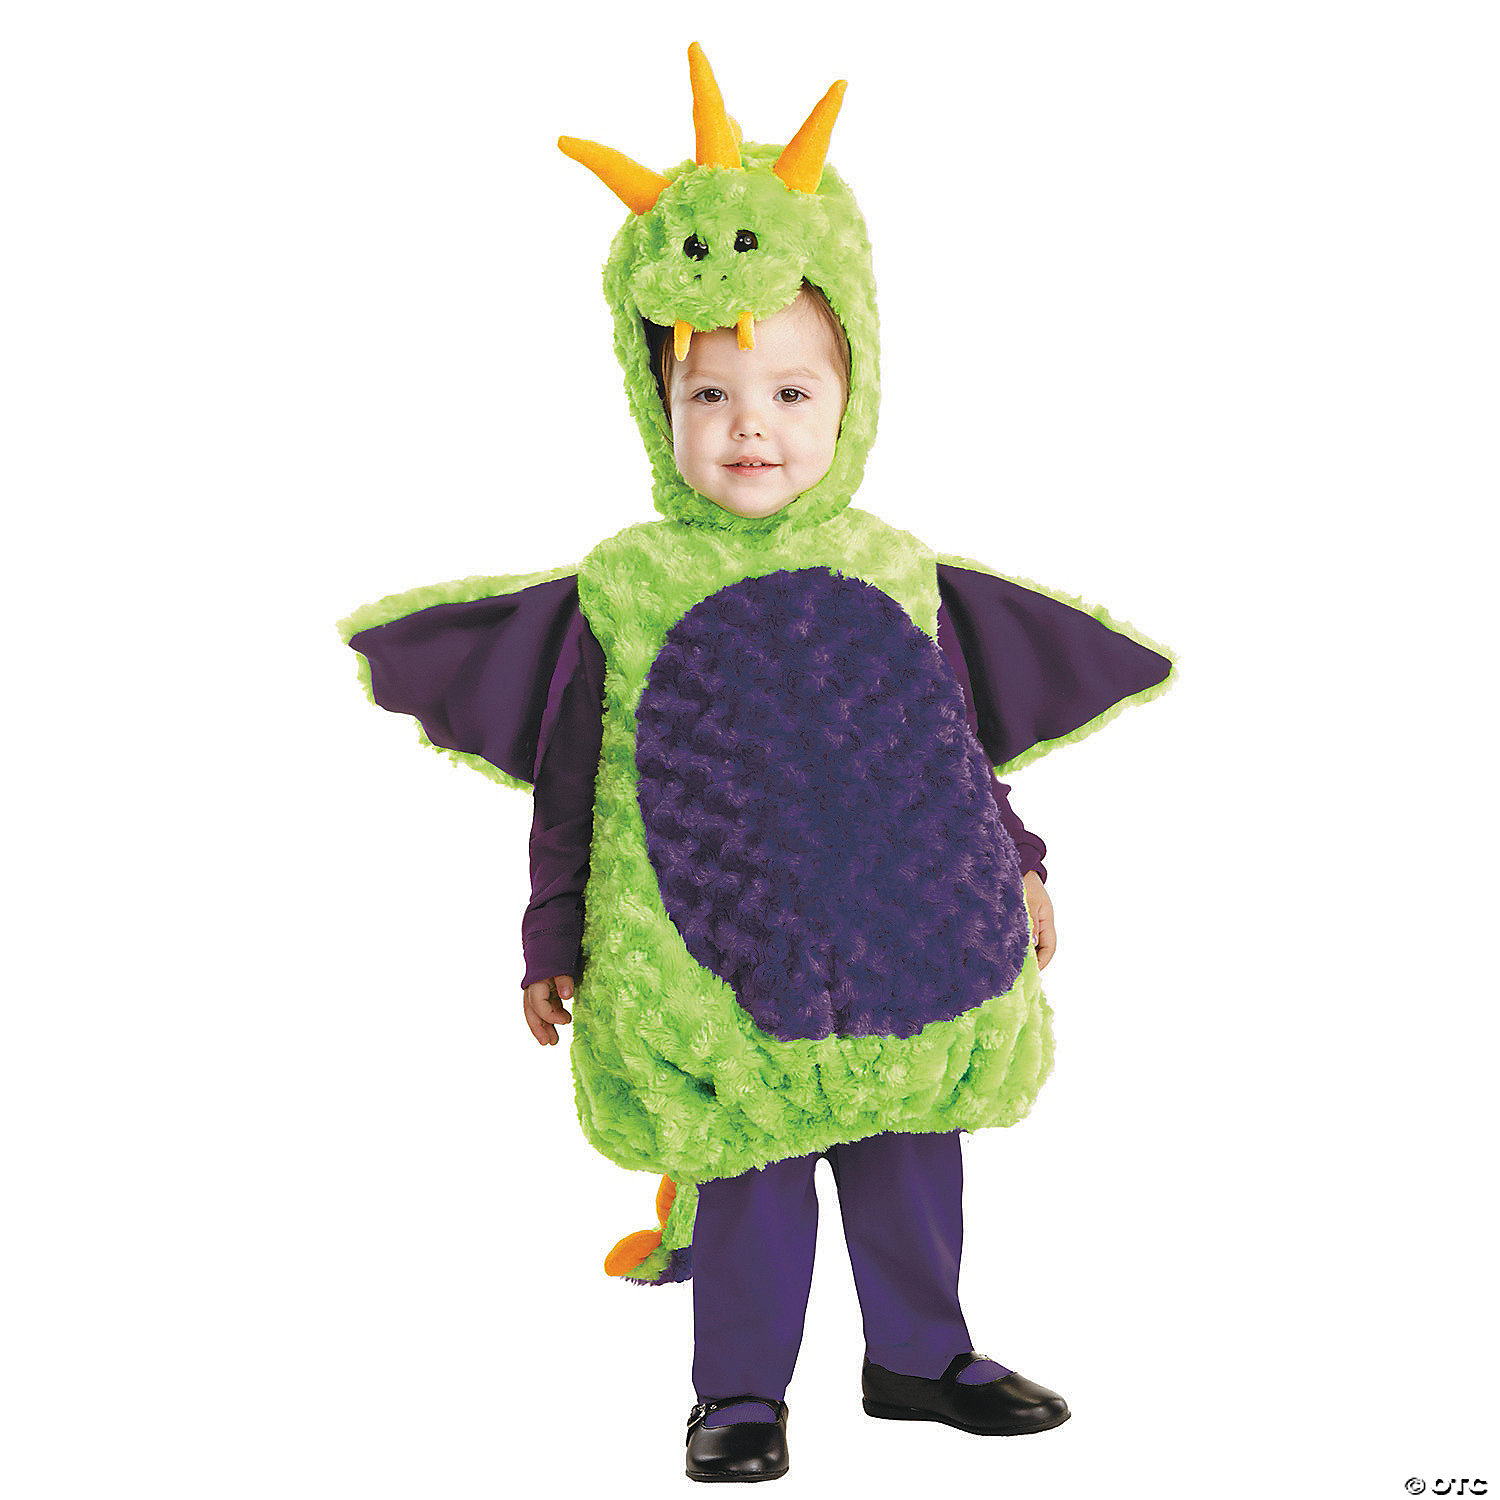 Proportional rural Pacific Islands Toddler Dragon Halloween Costume - 2T-4T | Oriental Trading